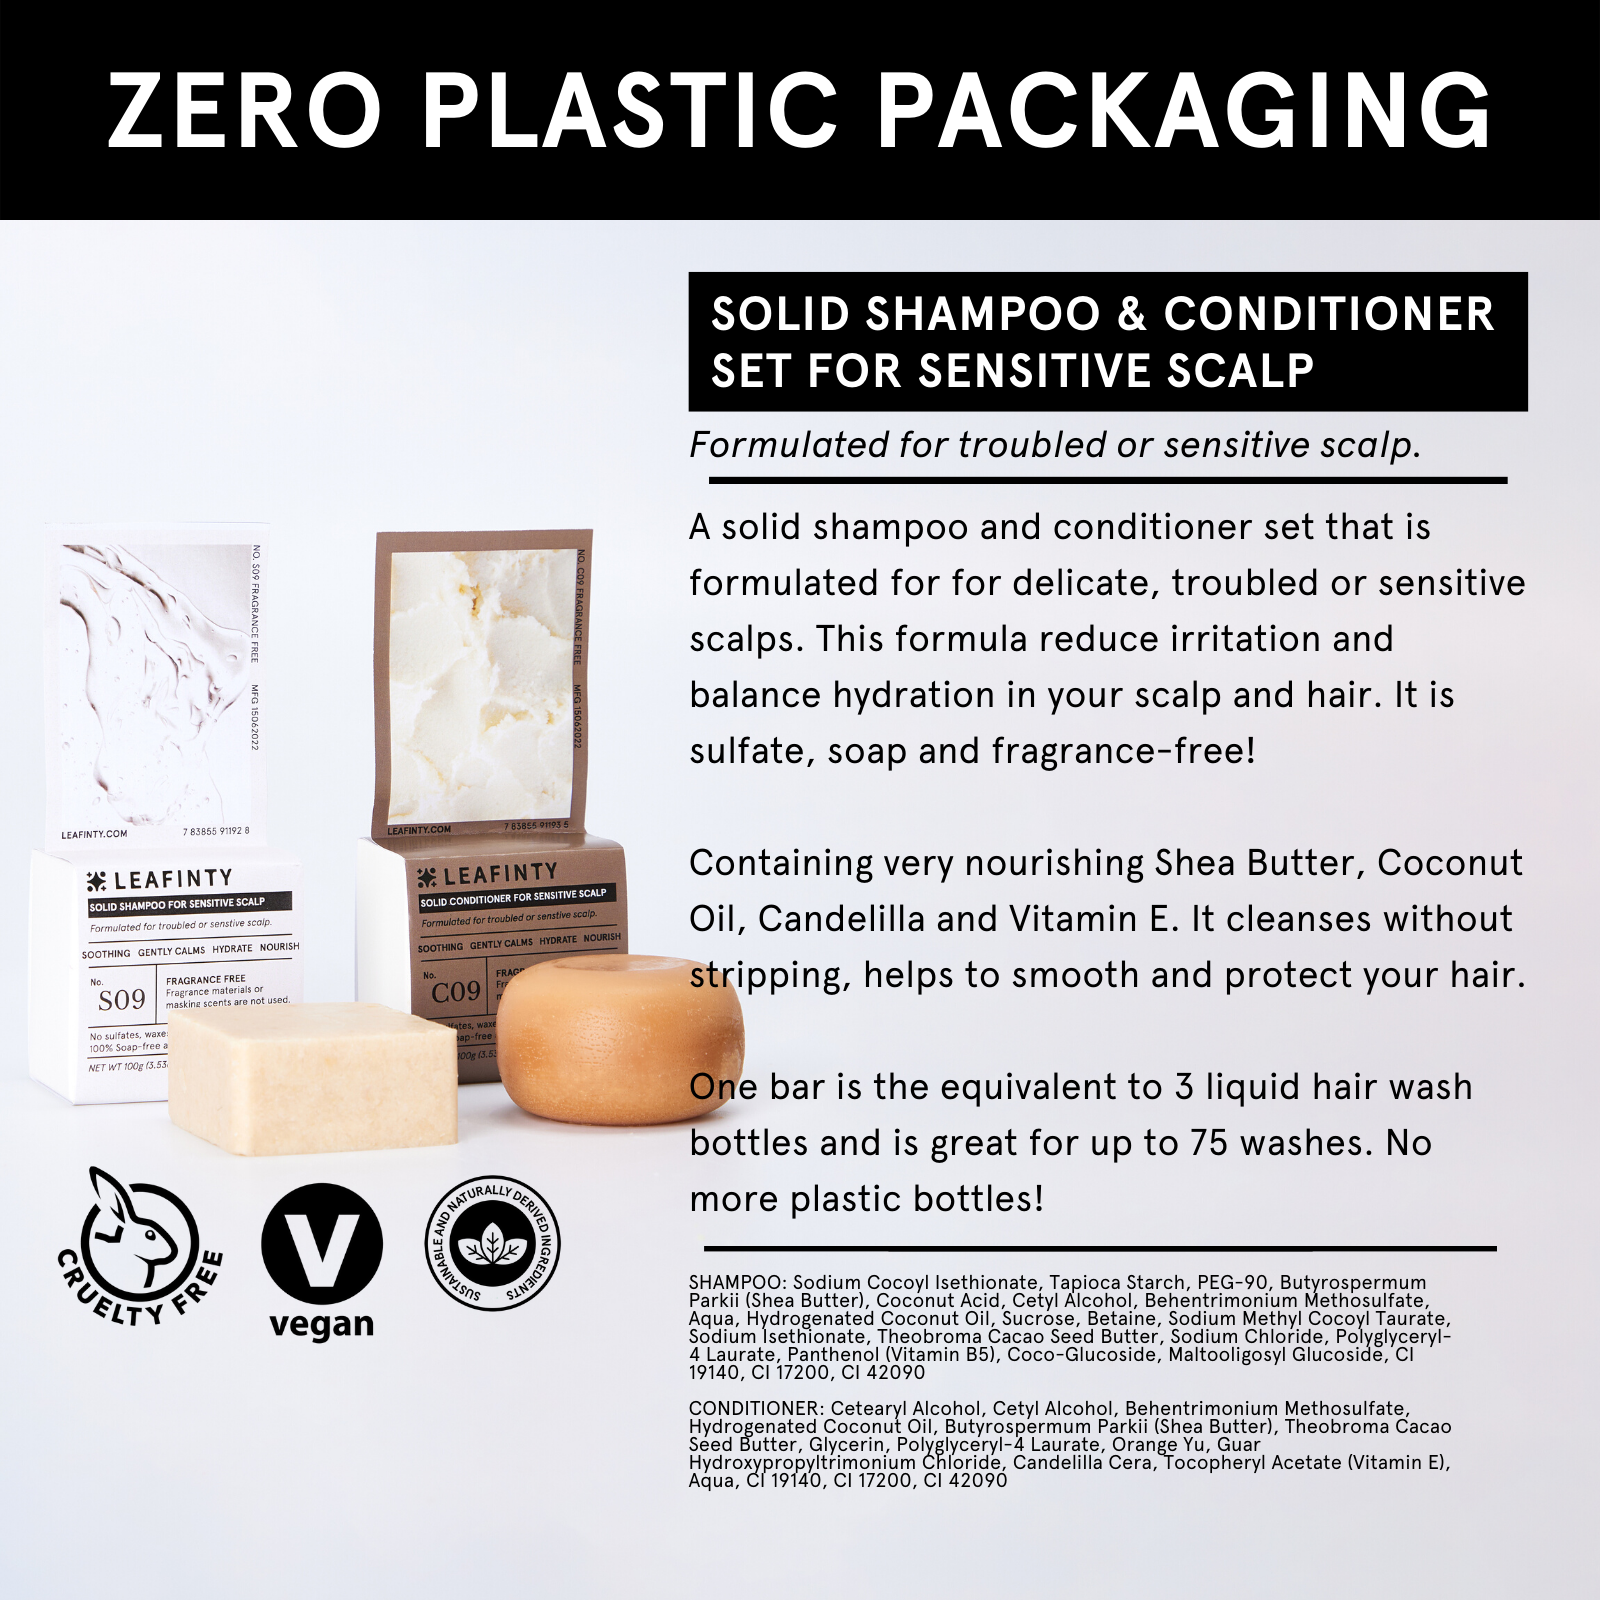 S09+C09 Solid Shampoo & Conditioner Set for Troubled or Sensitive Scalp